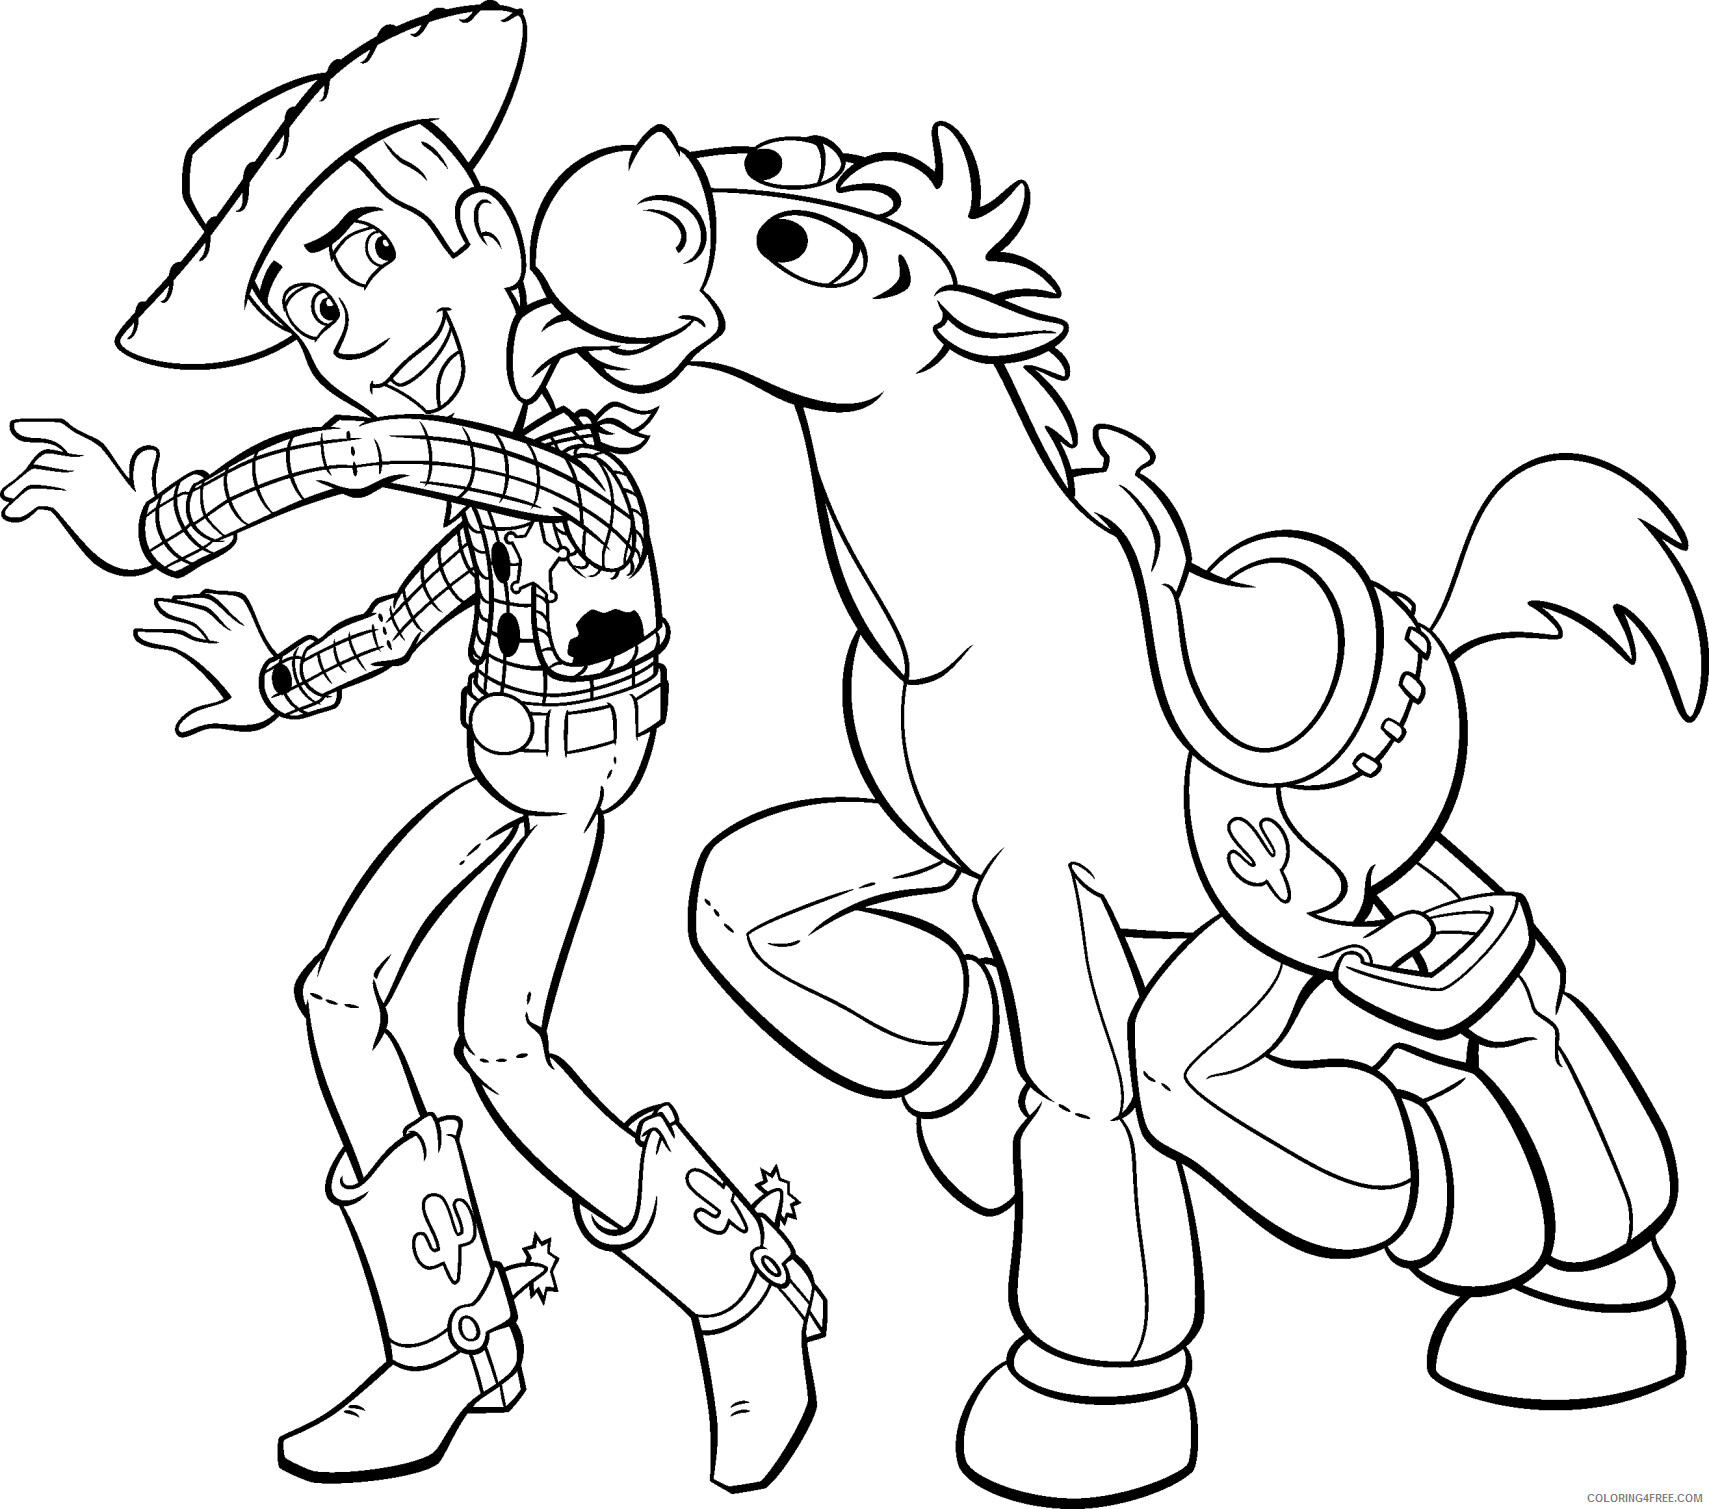 Toy Story Coloring Pages TV Film of Toy Story Printable 2020 10353 Coloring4free